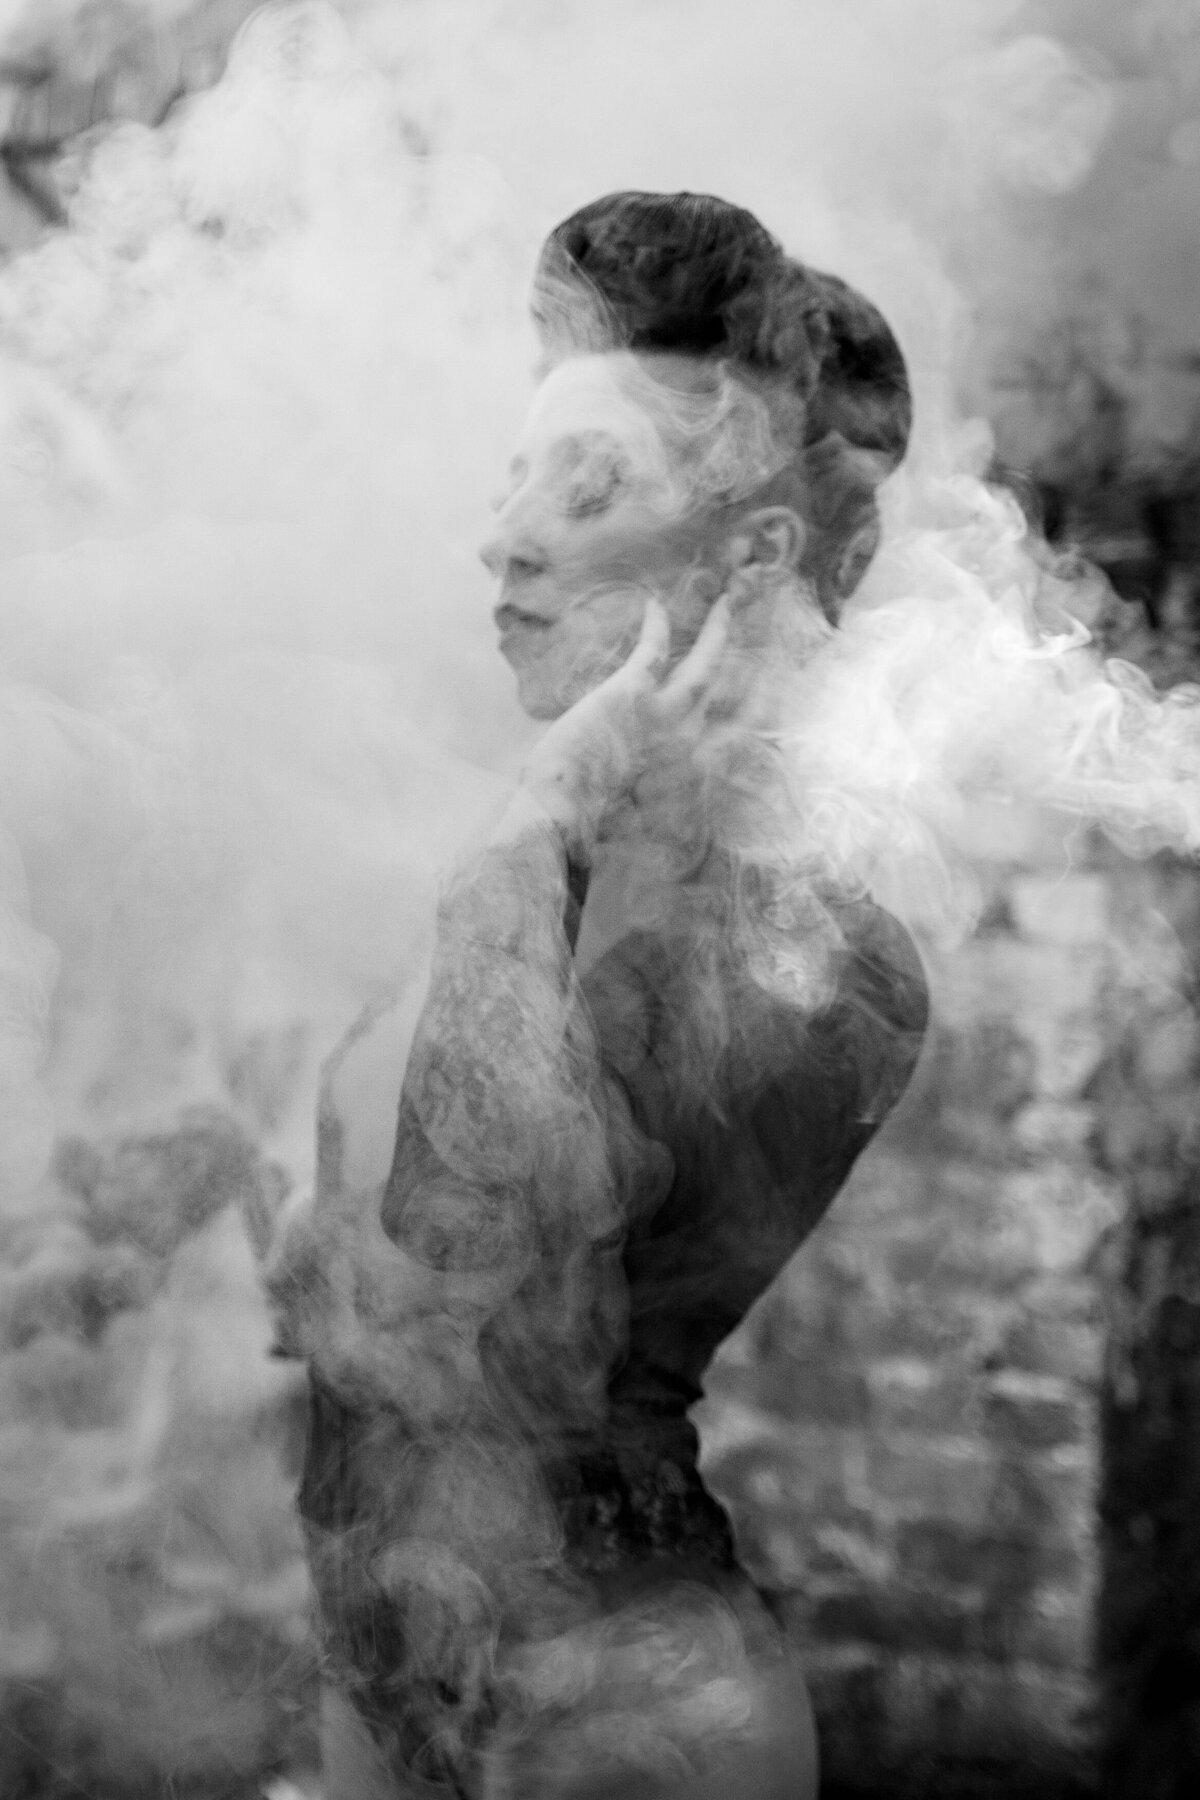 A person with their back arched and their hand up by their face with smoke in front of them.